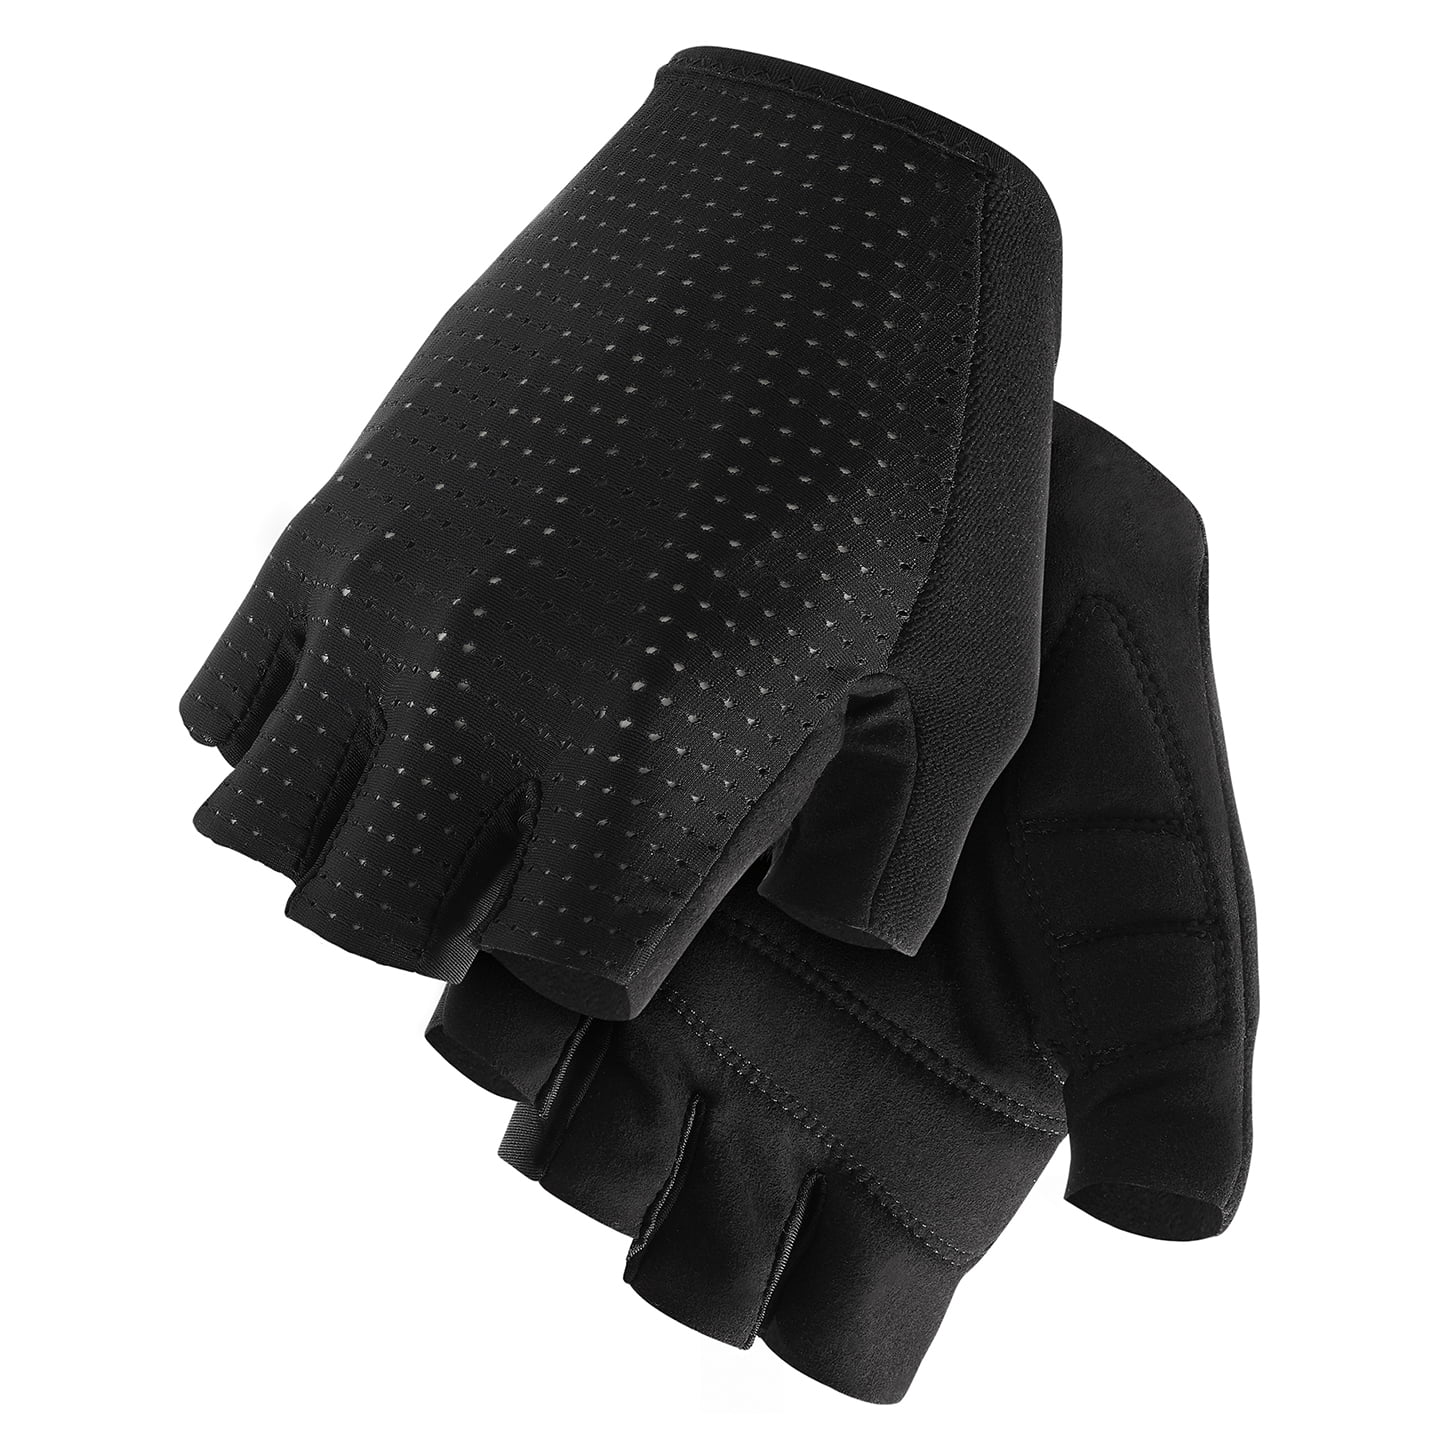 GT C2 Gloves, for men, size S, Cycling gloves, Cycling clothing